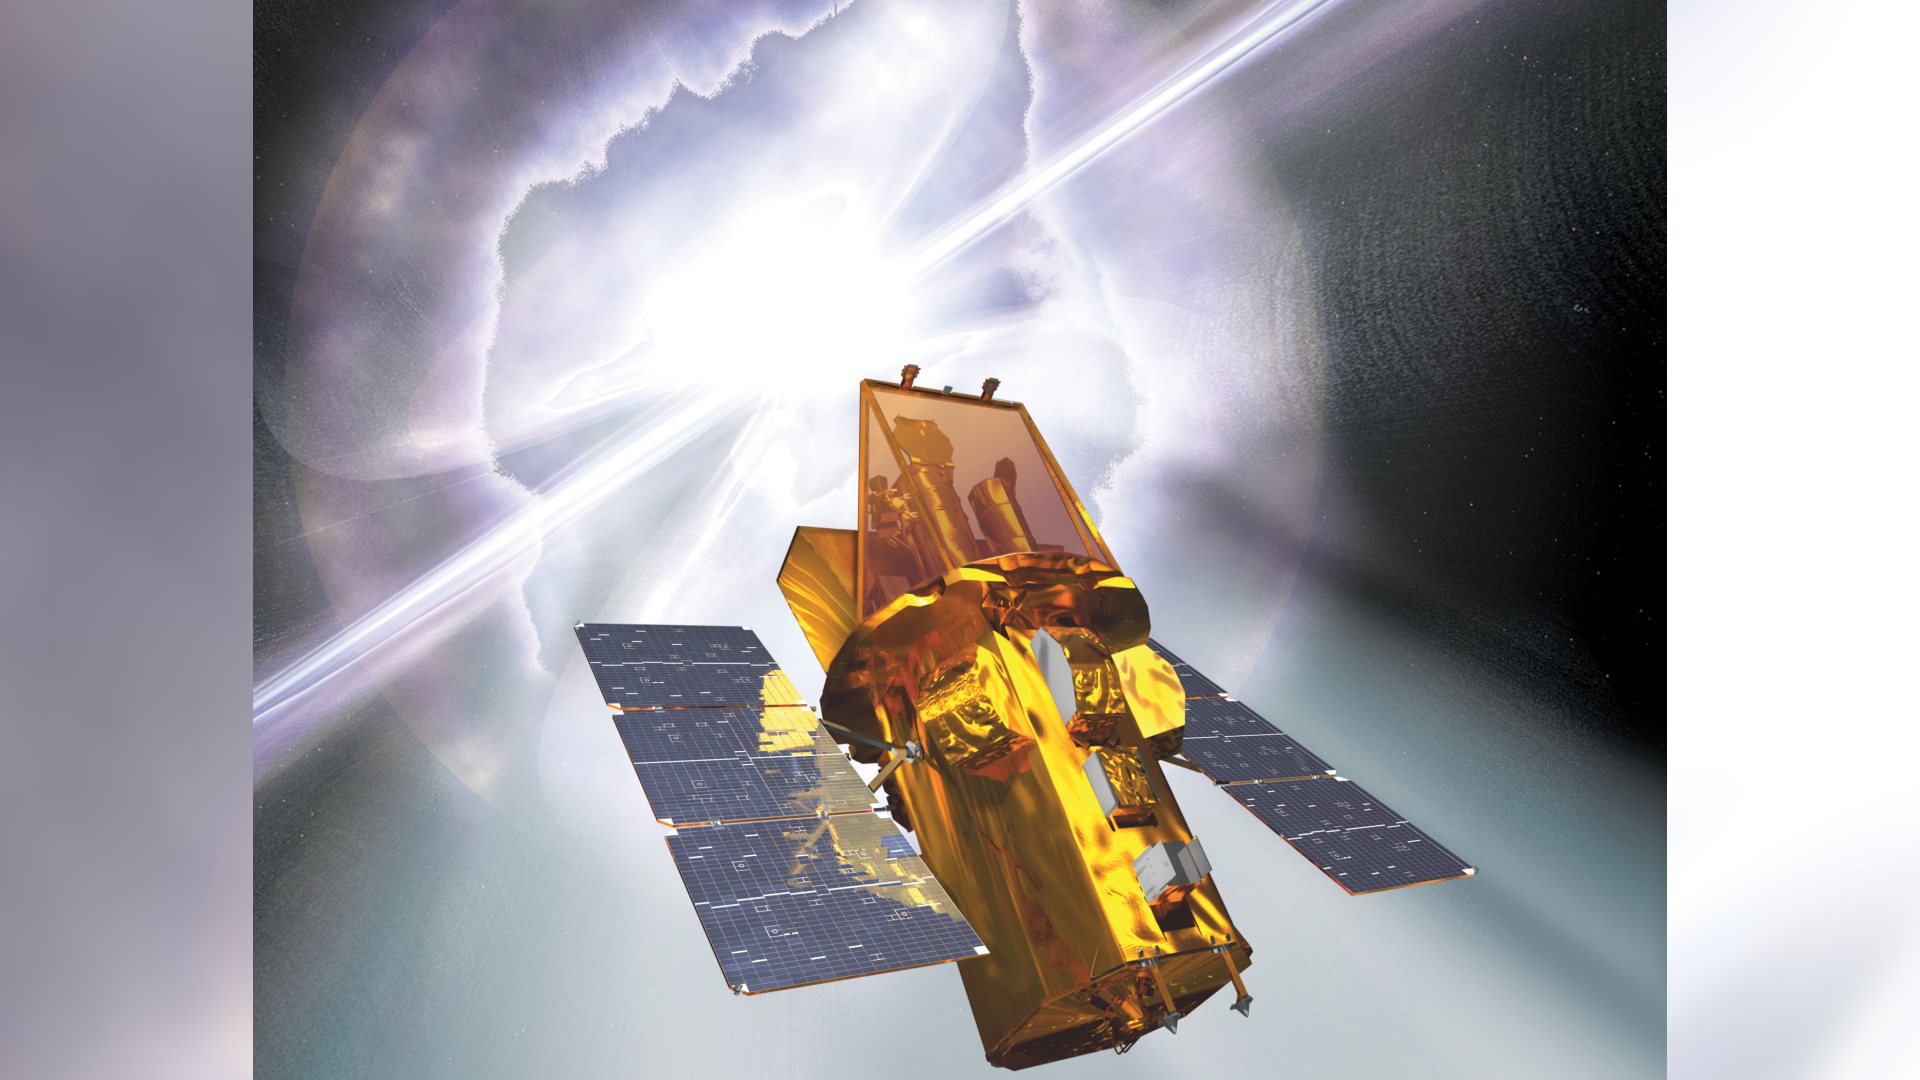 An artist's rendering of the Swift spacecraft with a gamma-ray burst in the background.